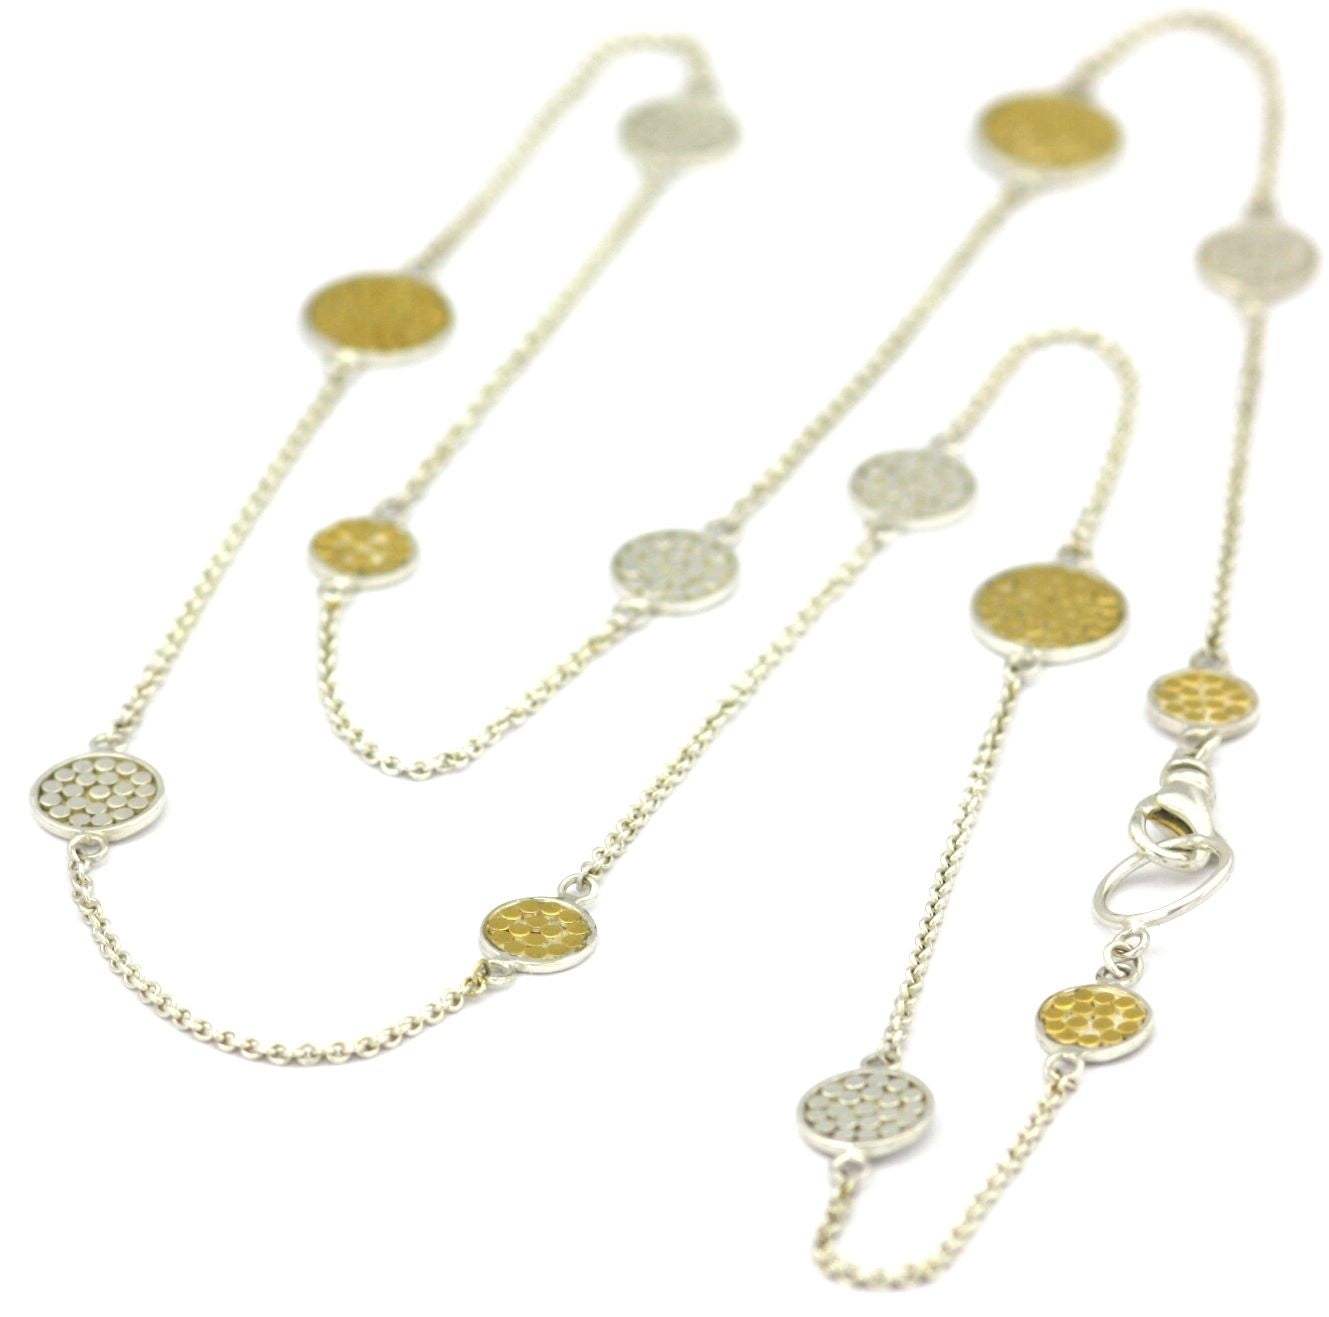 N841G SOHO .925 Sterling Silver Round Multi-Station Necklace With 18k Gold Vermeil - 32"